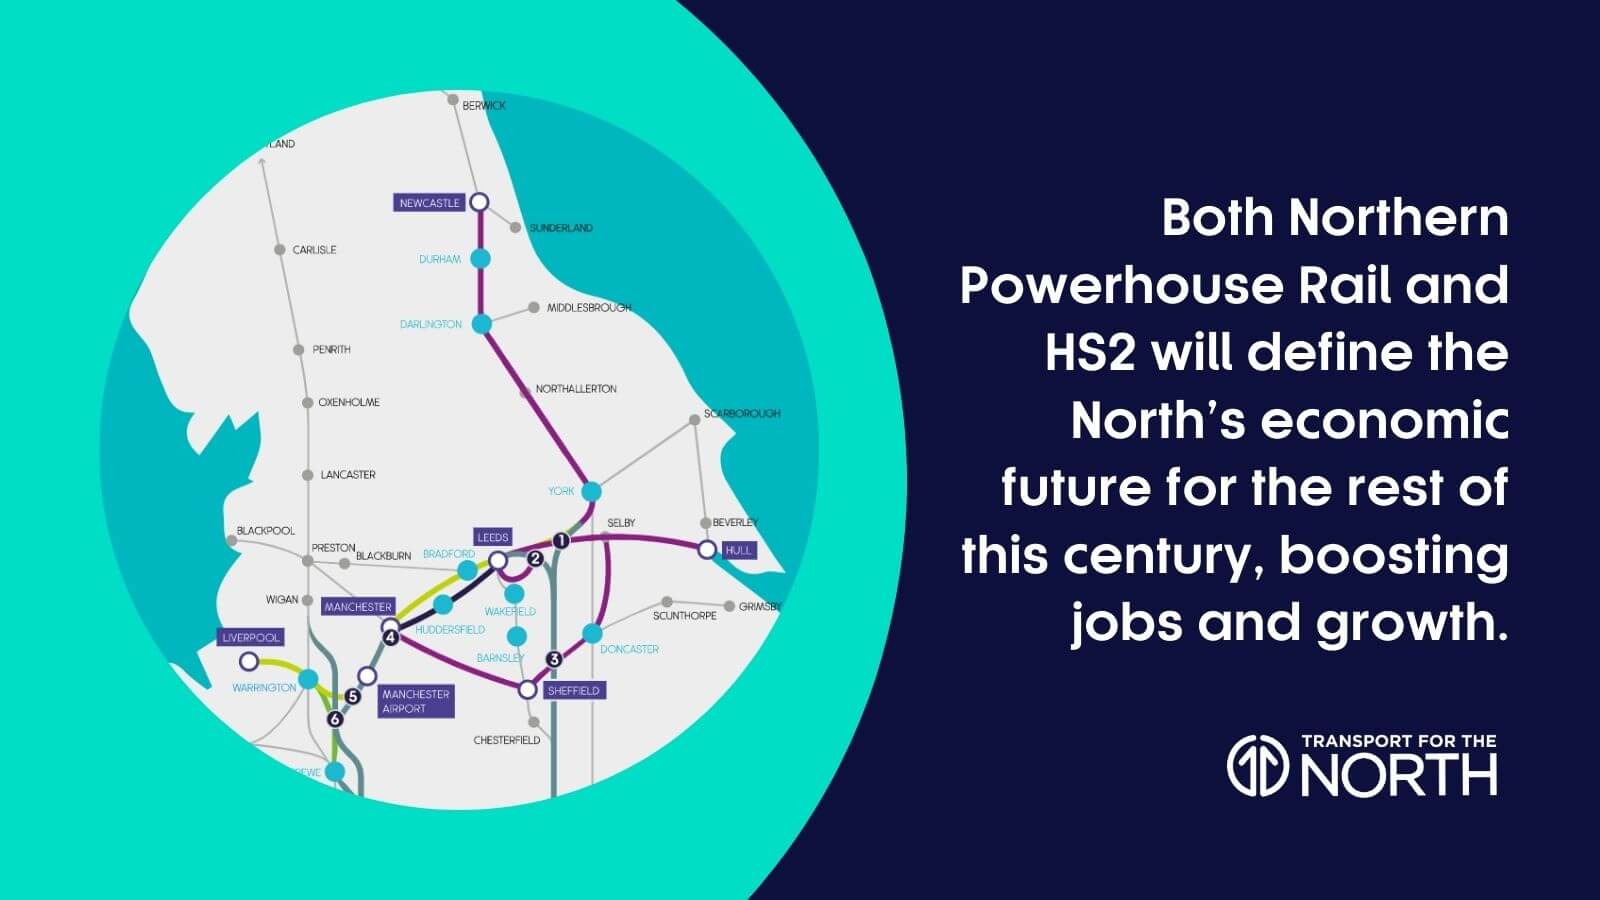 Leaders agree final Northern Powerhouse Rail plan to create jobs and define the North’s future